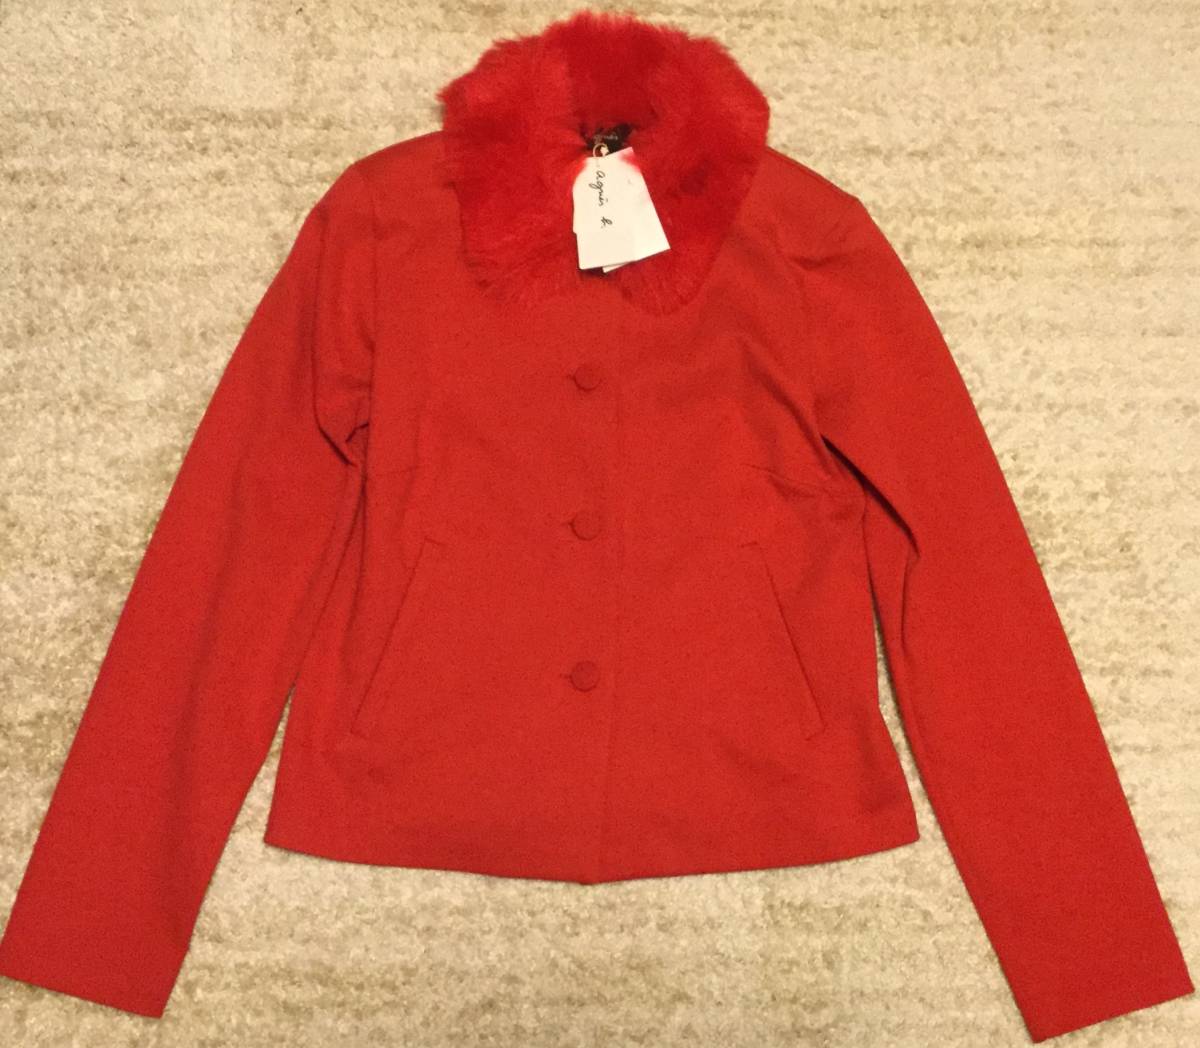  regular price 74%OFF unused tag equipped Agnes B agnes b. jacket fake fur red S lady's Christmas Halloween .